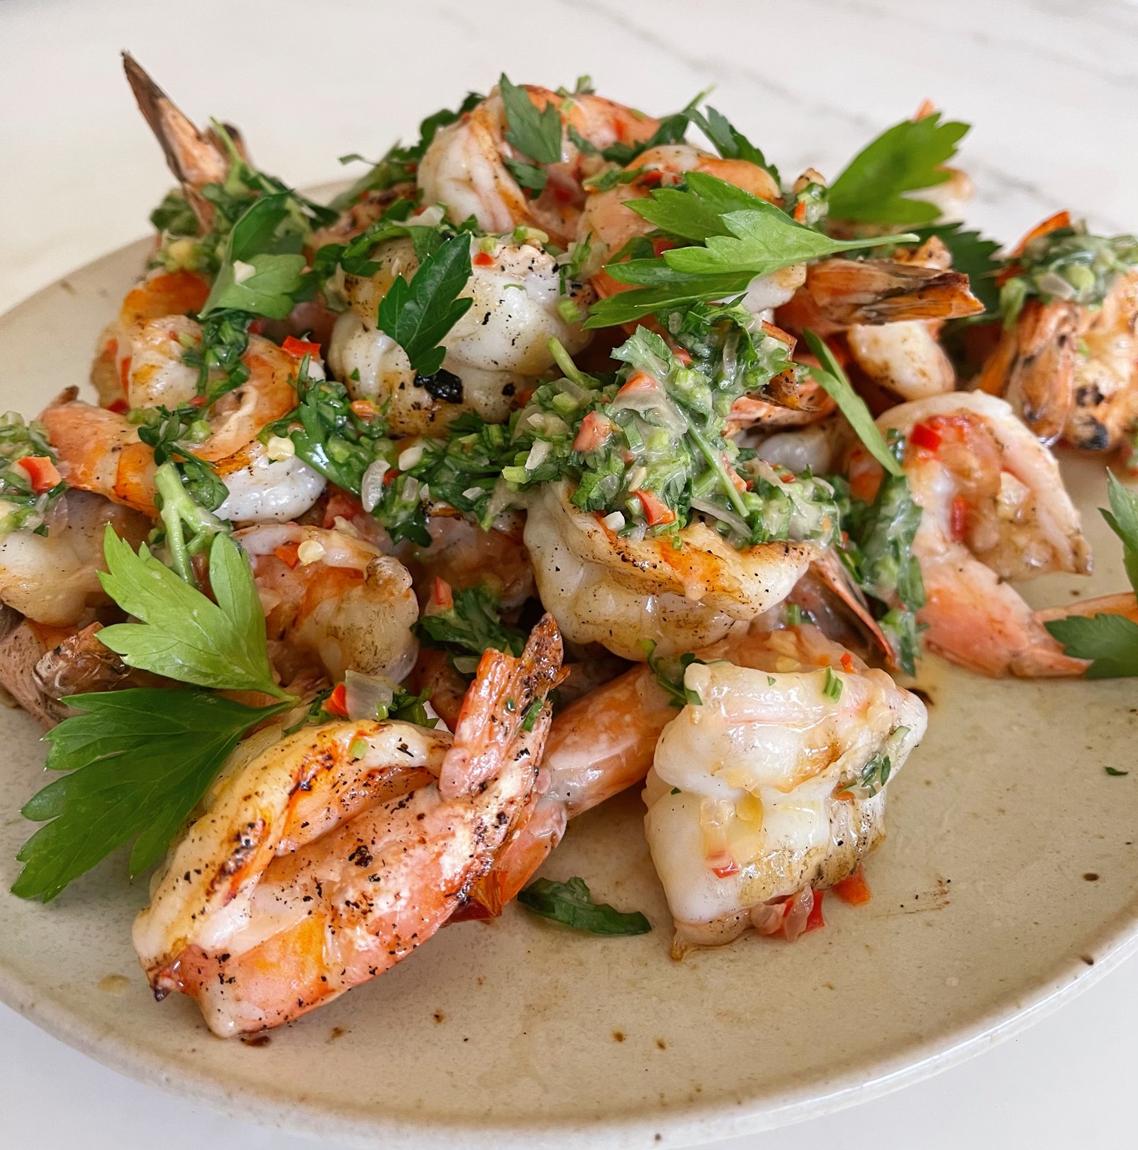  Juicy, butterflied shrimp sizzling in a flavorful wine sauce.